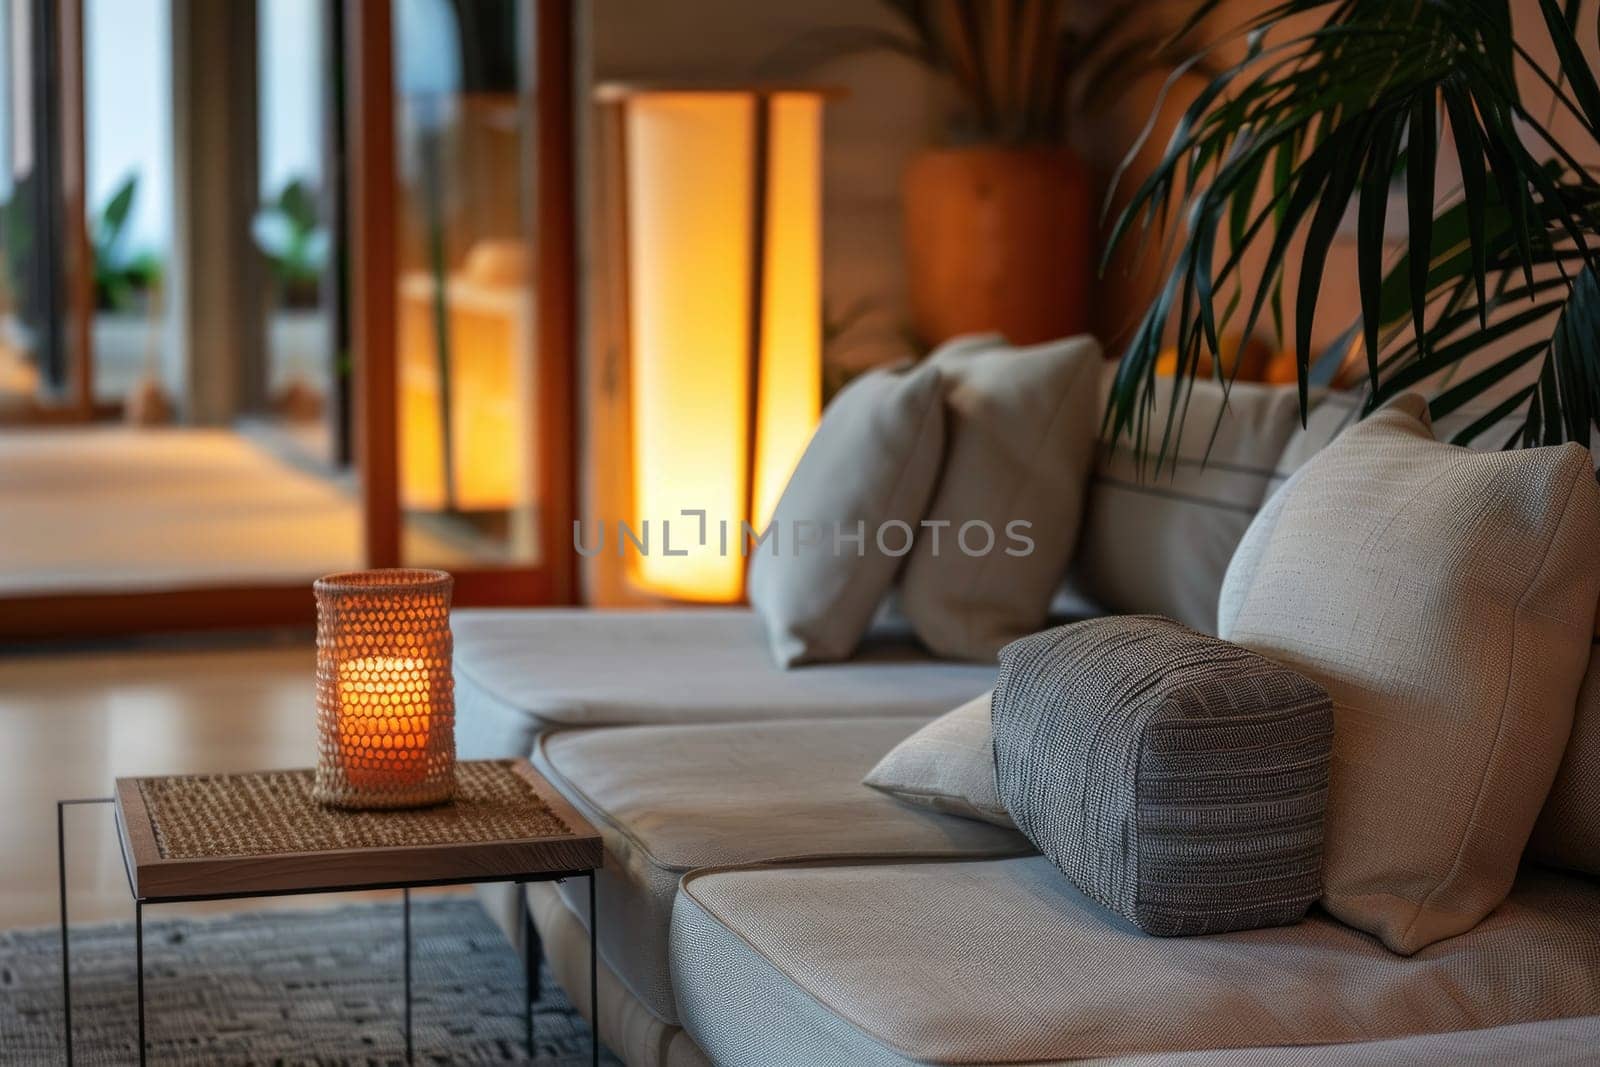 a cozy interior adorned with minimalist decor, featuring soft lighting, neutral tones